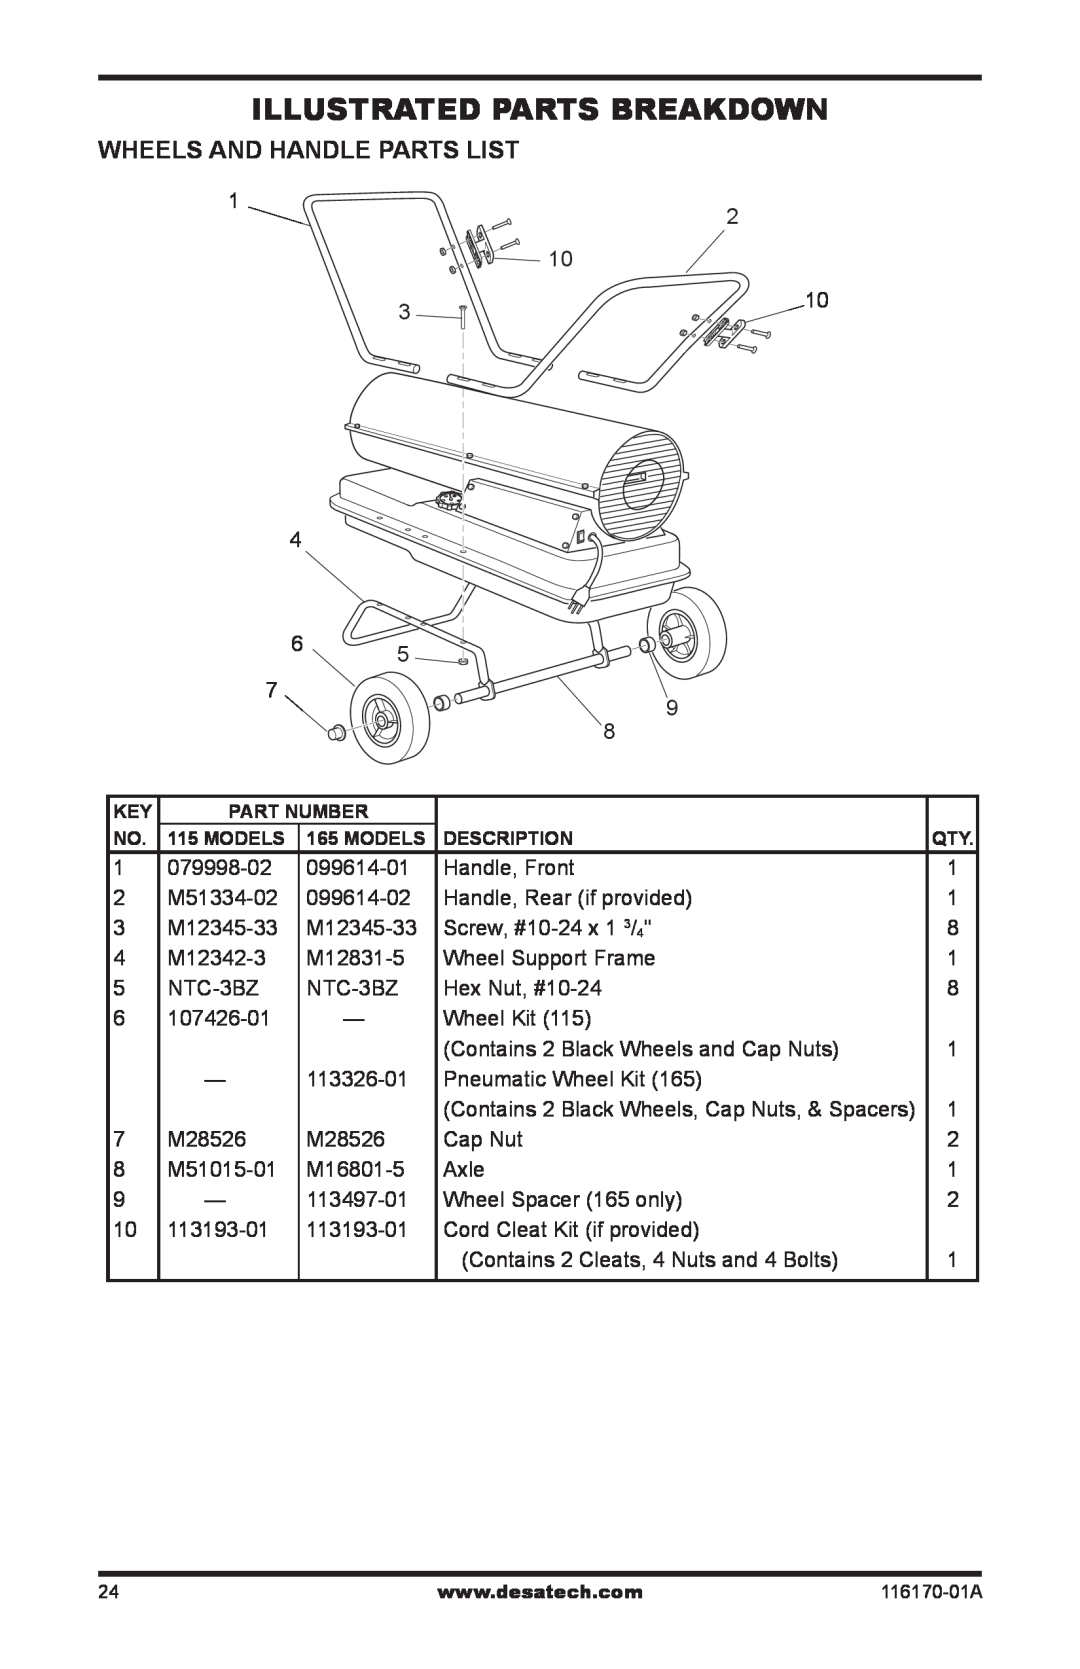 Desa RC55CT, BC55CT, BC115DT, BC165DT, UKC115DT, UKC70ET, UKC55CT Illustrated Parts Breakdown, Wheels And Handle Parts List 